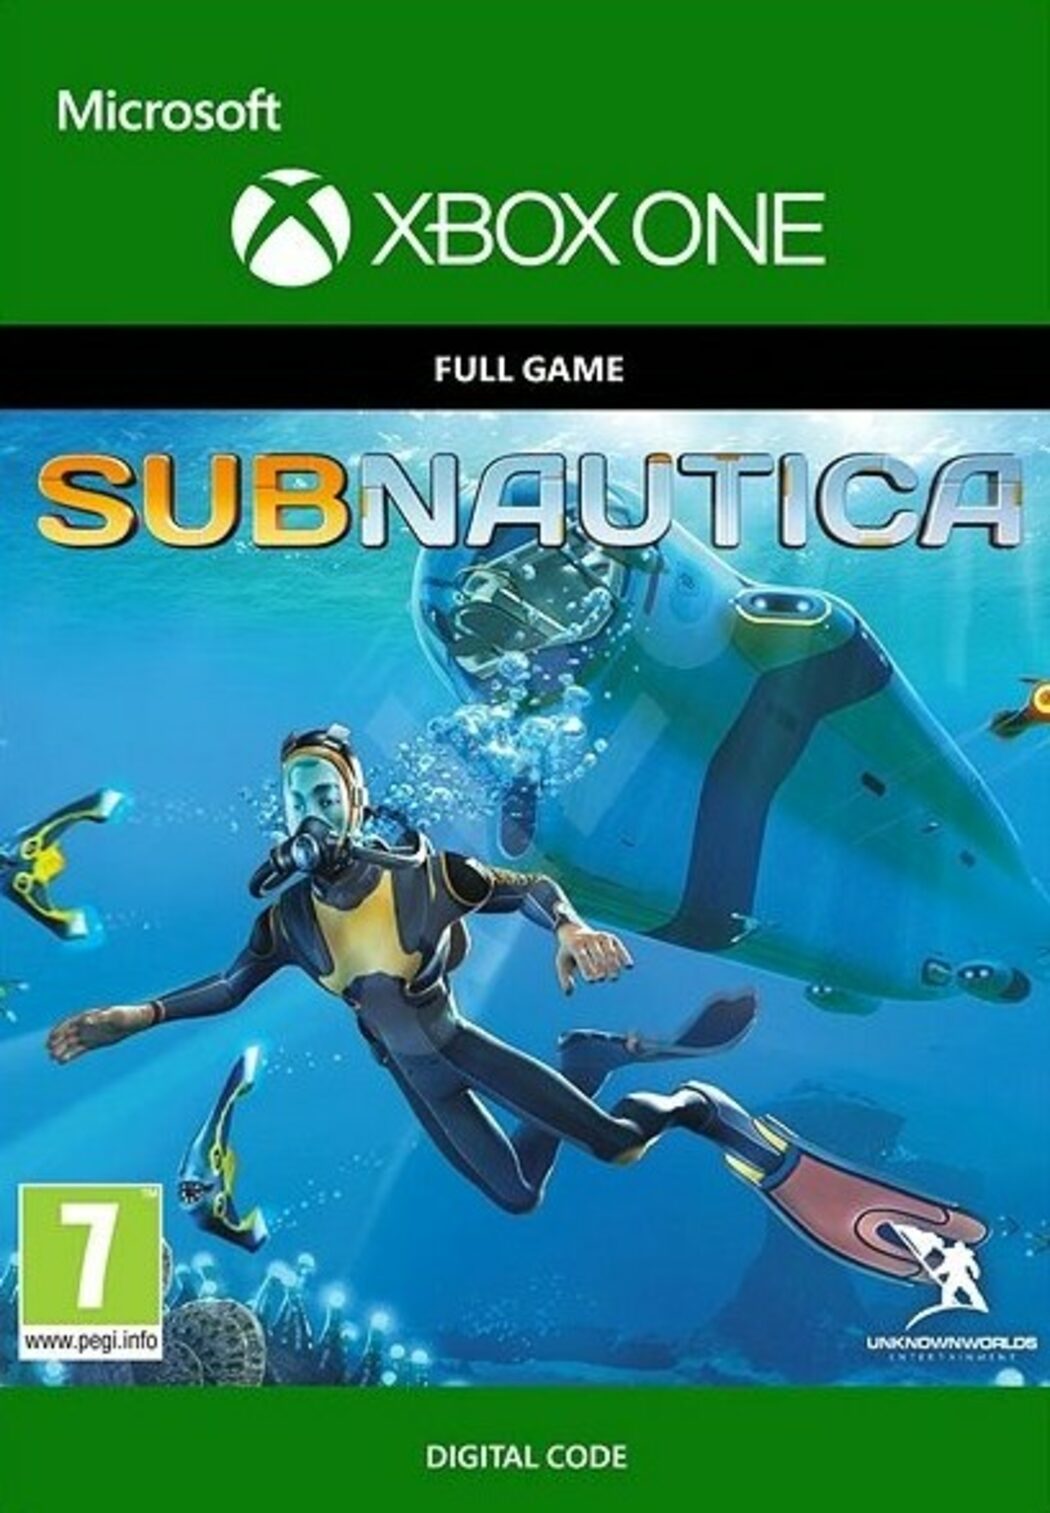 Elasticiteit Notebook Lam Subnautica Xbox key. Visit and buy cheaper today! | ENEBA